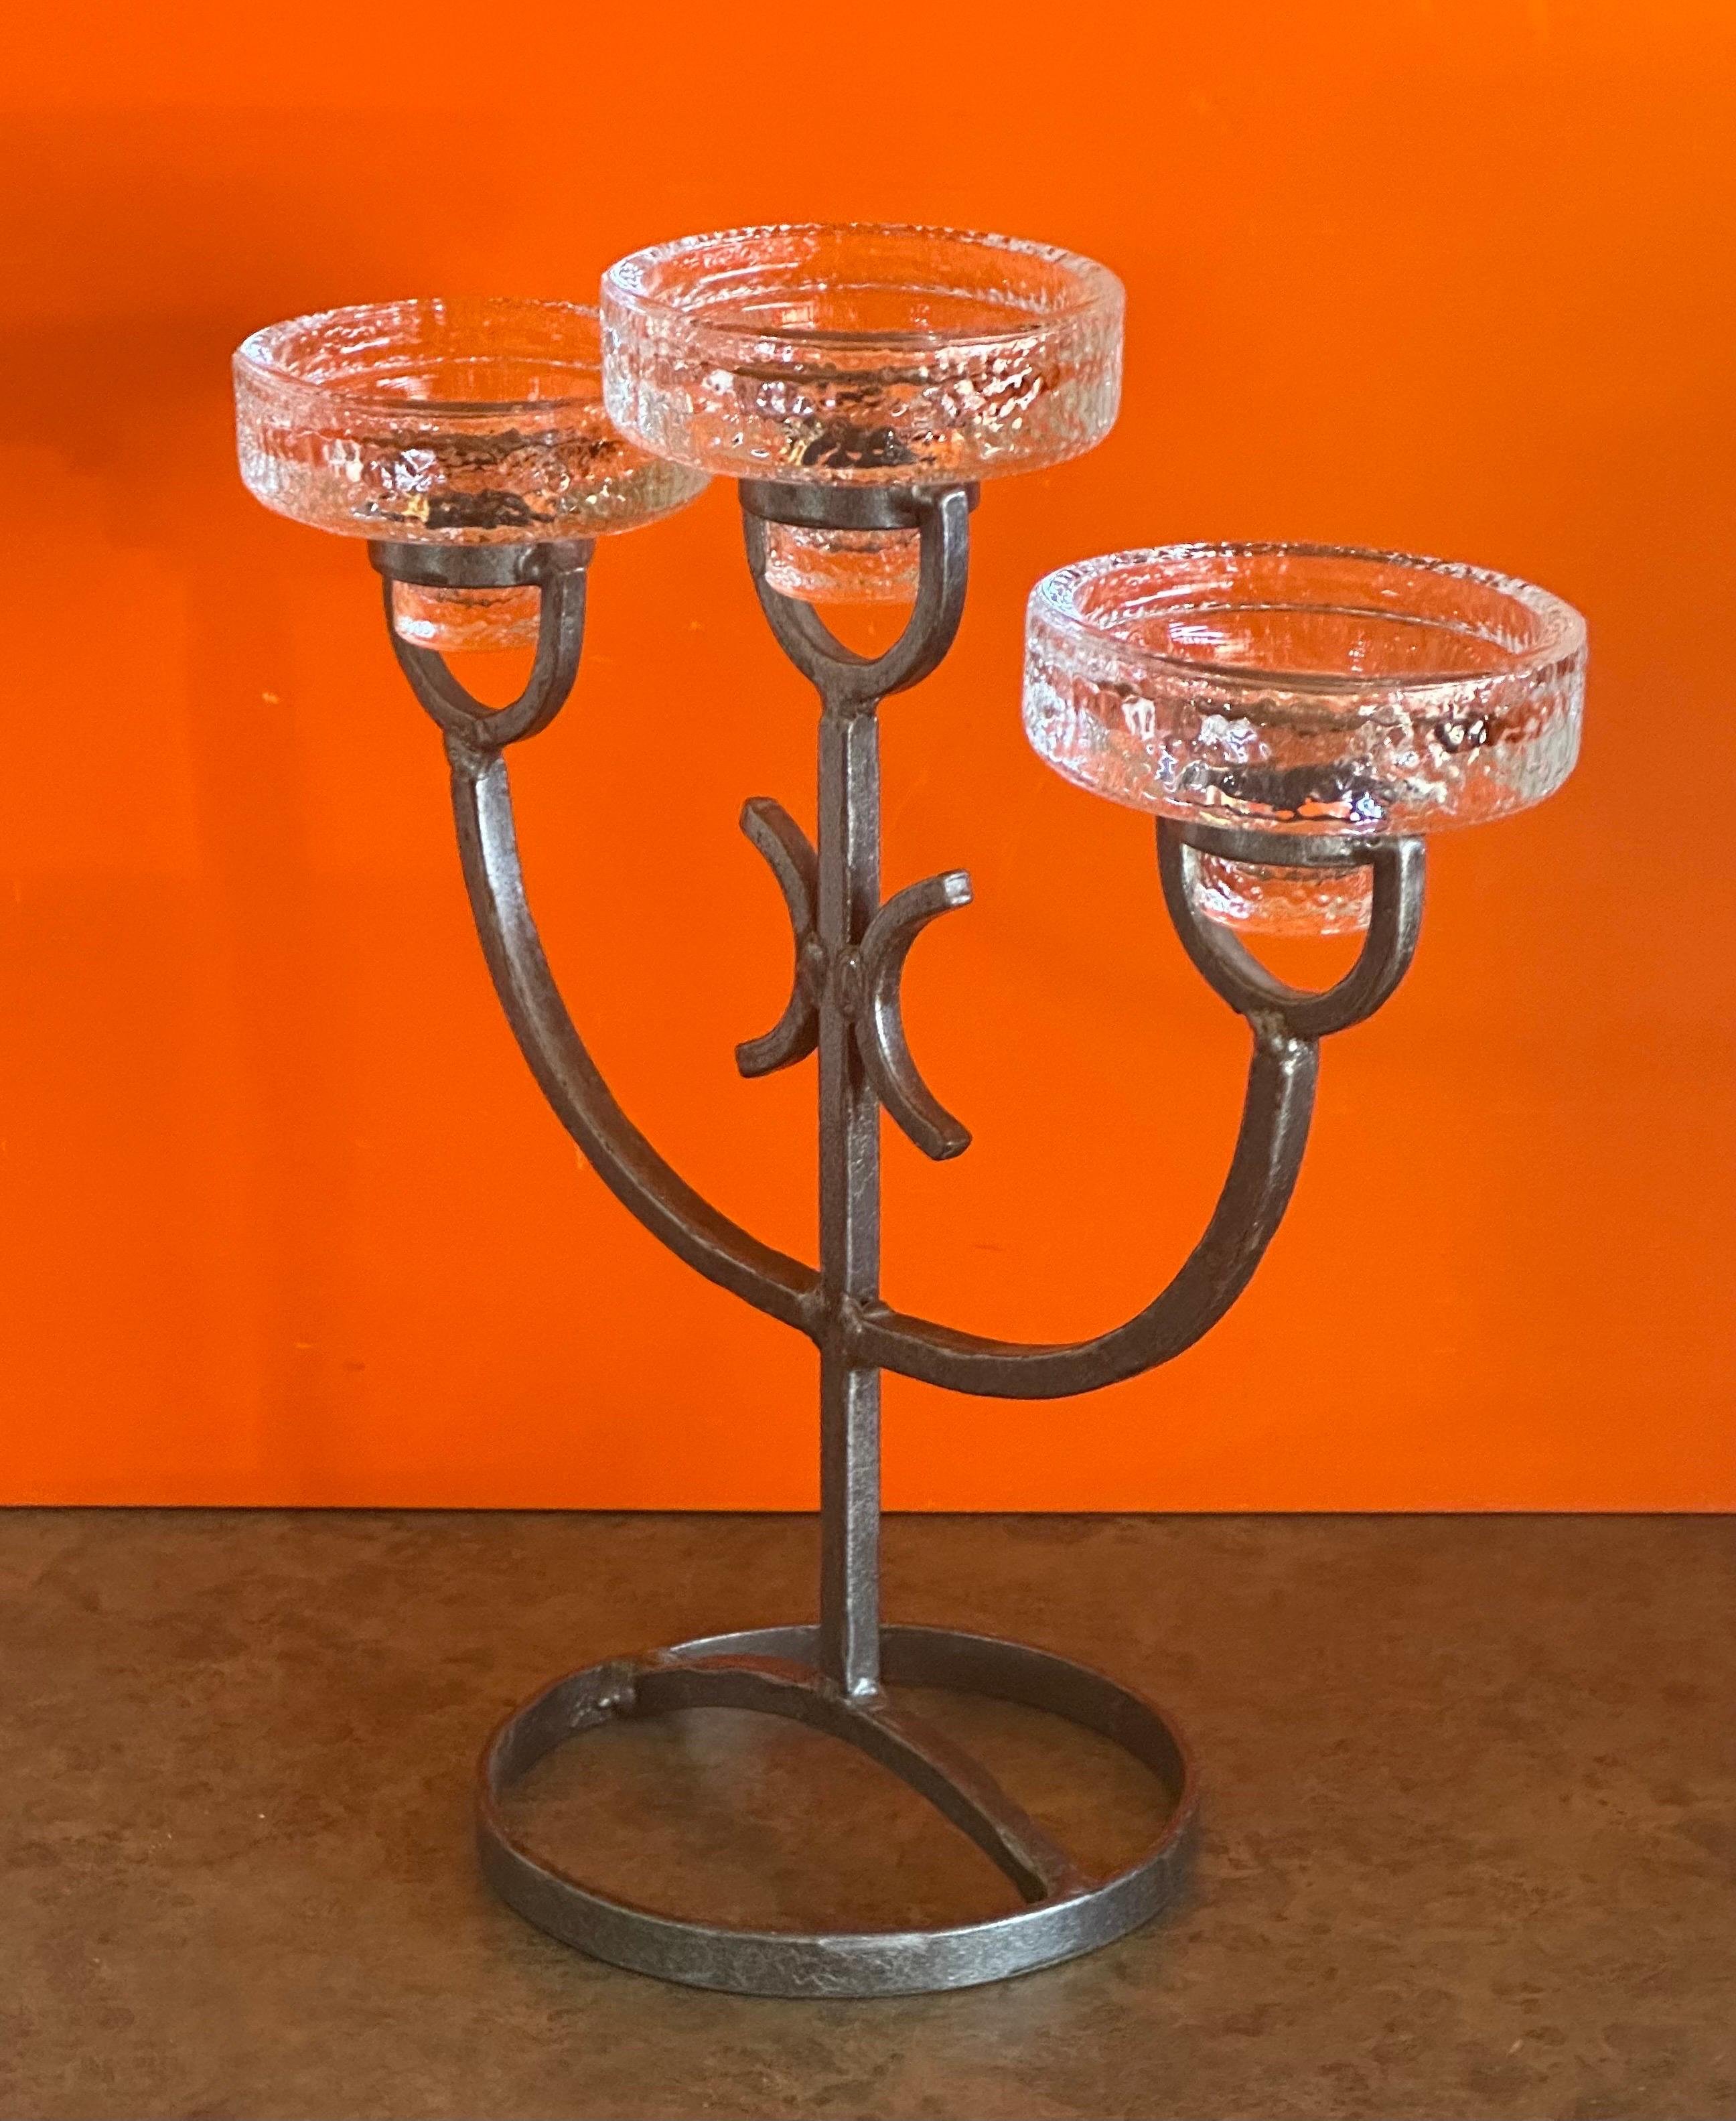 A beautiful three glass votive candleholder in hand hammered iron by Erik Hoglund for Kosta Boda, circa 1960s.  The piece is in very good vintage condition with no chips or cracks to the glass with the iron base showing a wonderful patina.  The